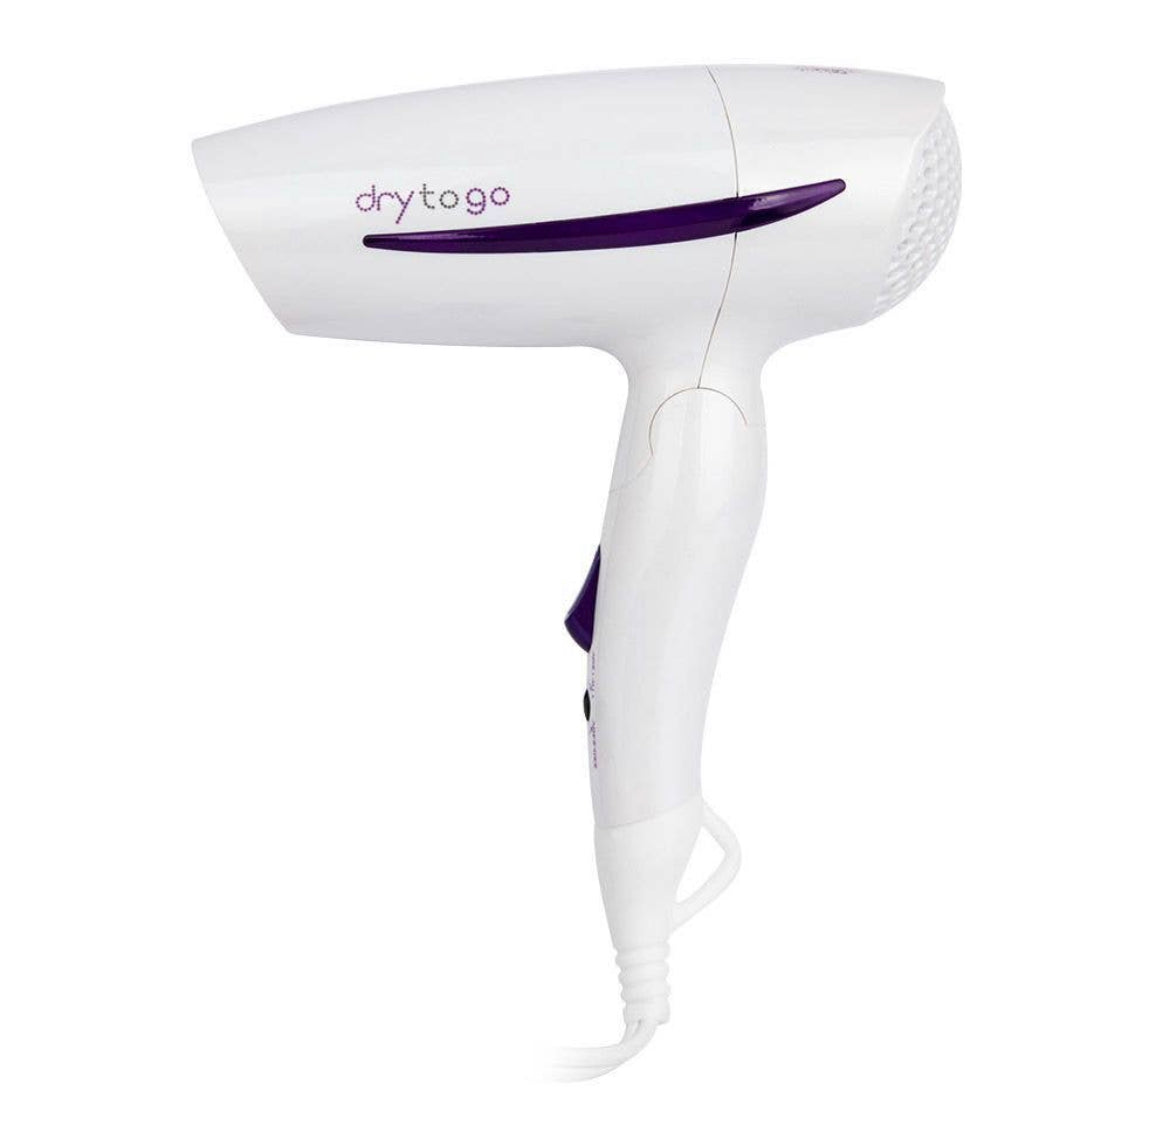 Dry To-Go Dual Voltage Hair Dryer